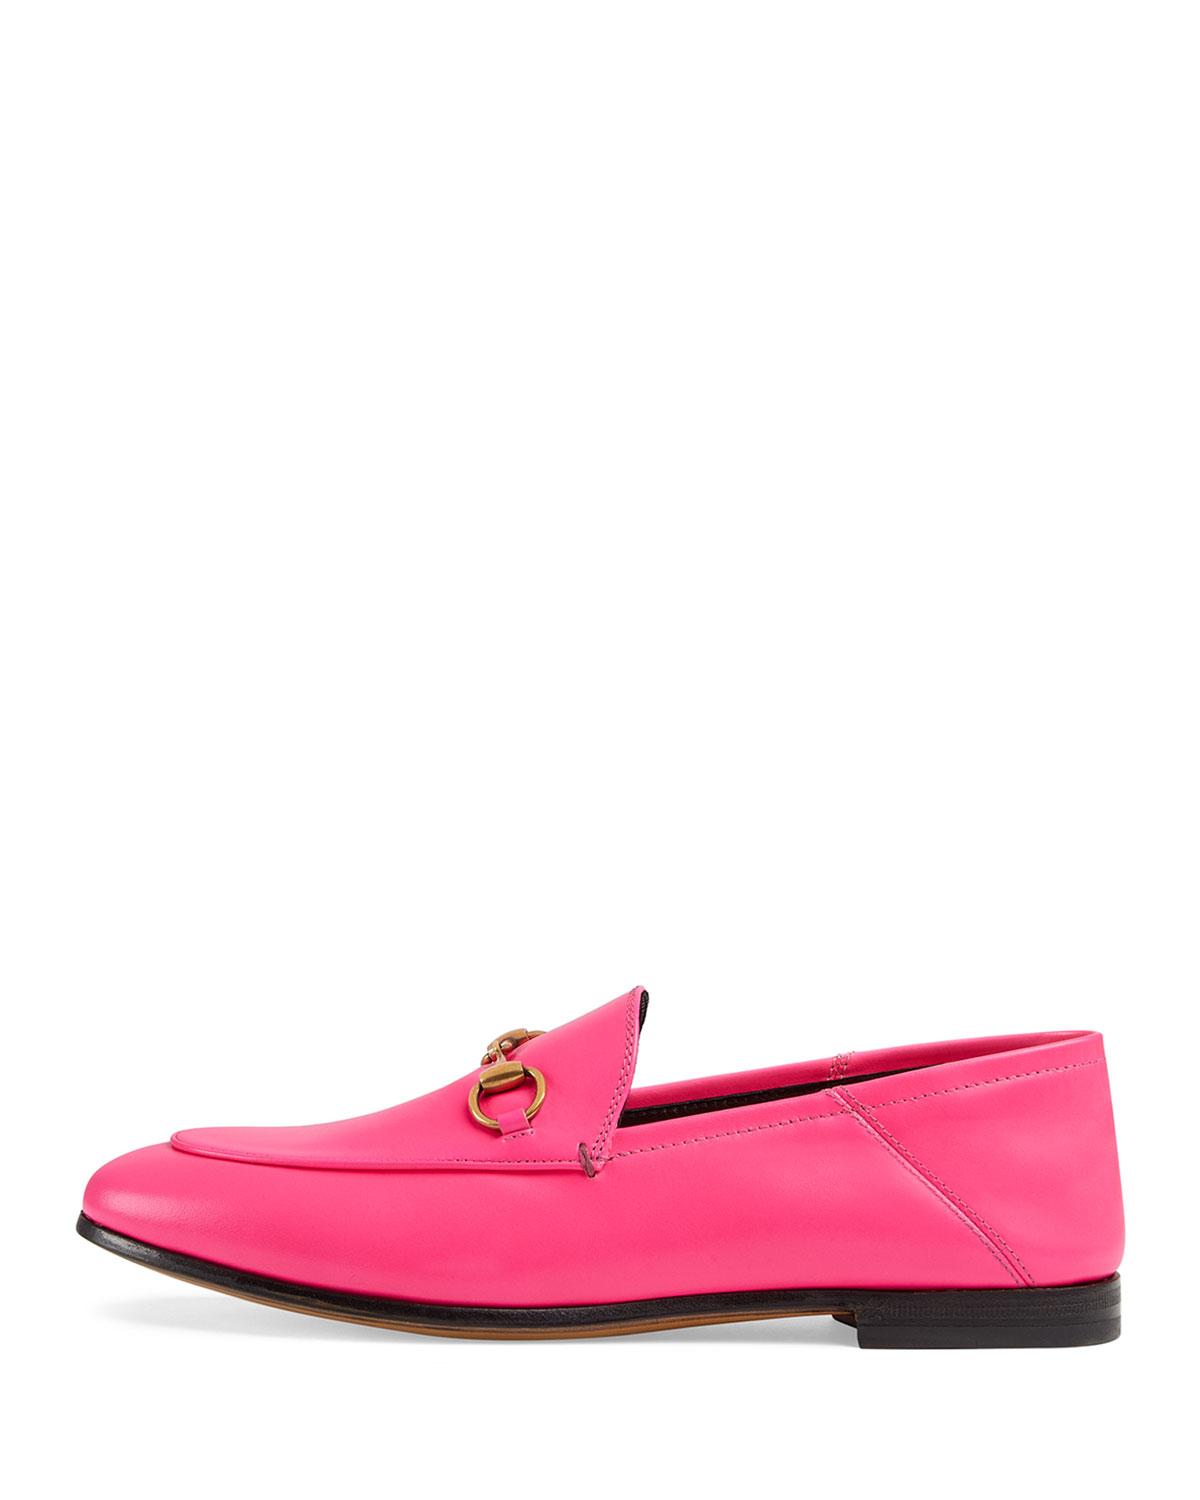 neon pink gucci loafer